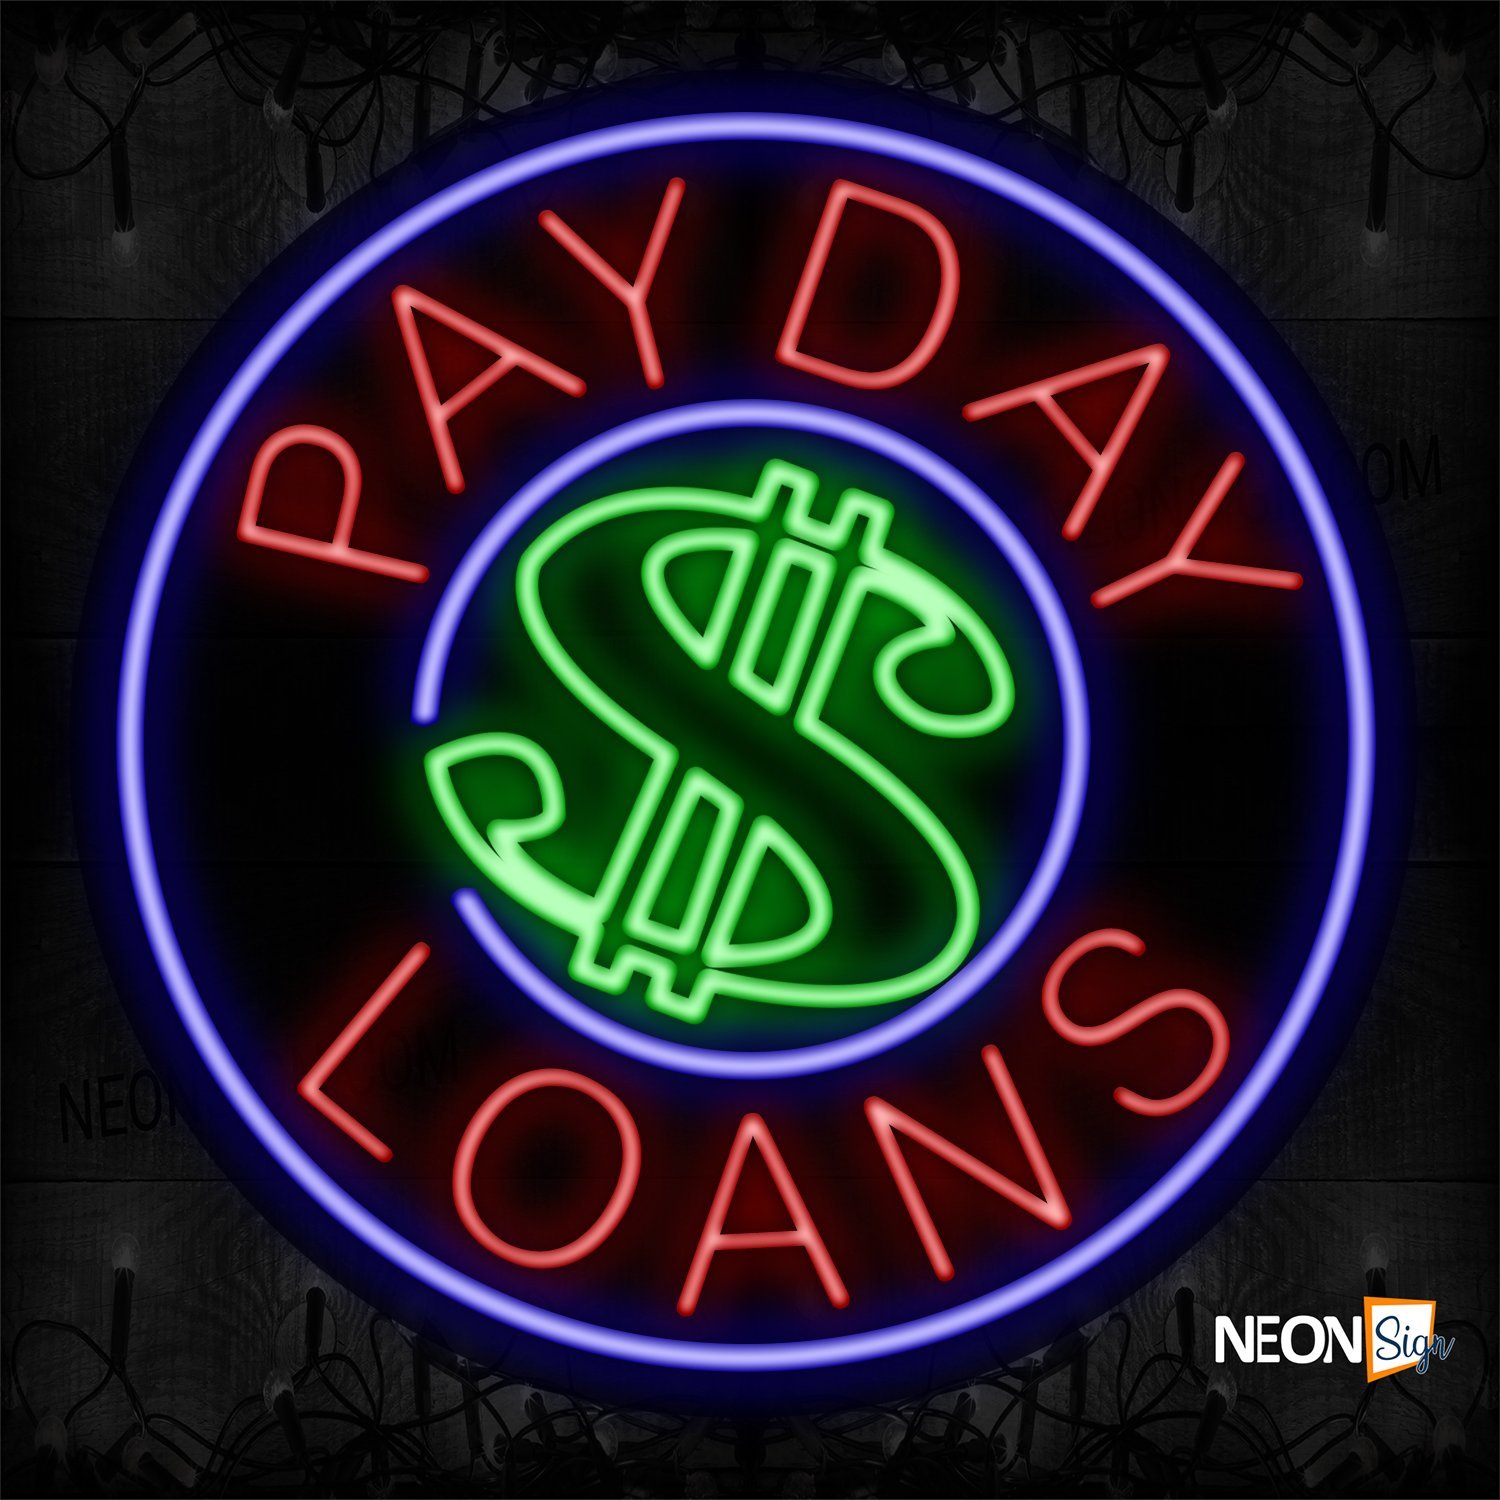 Image of 11159 Payday $ Loans With Circle Blue Border Neon Sign_26x26 Contoured Black Backing